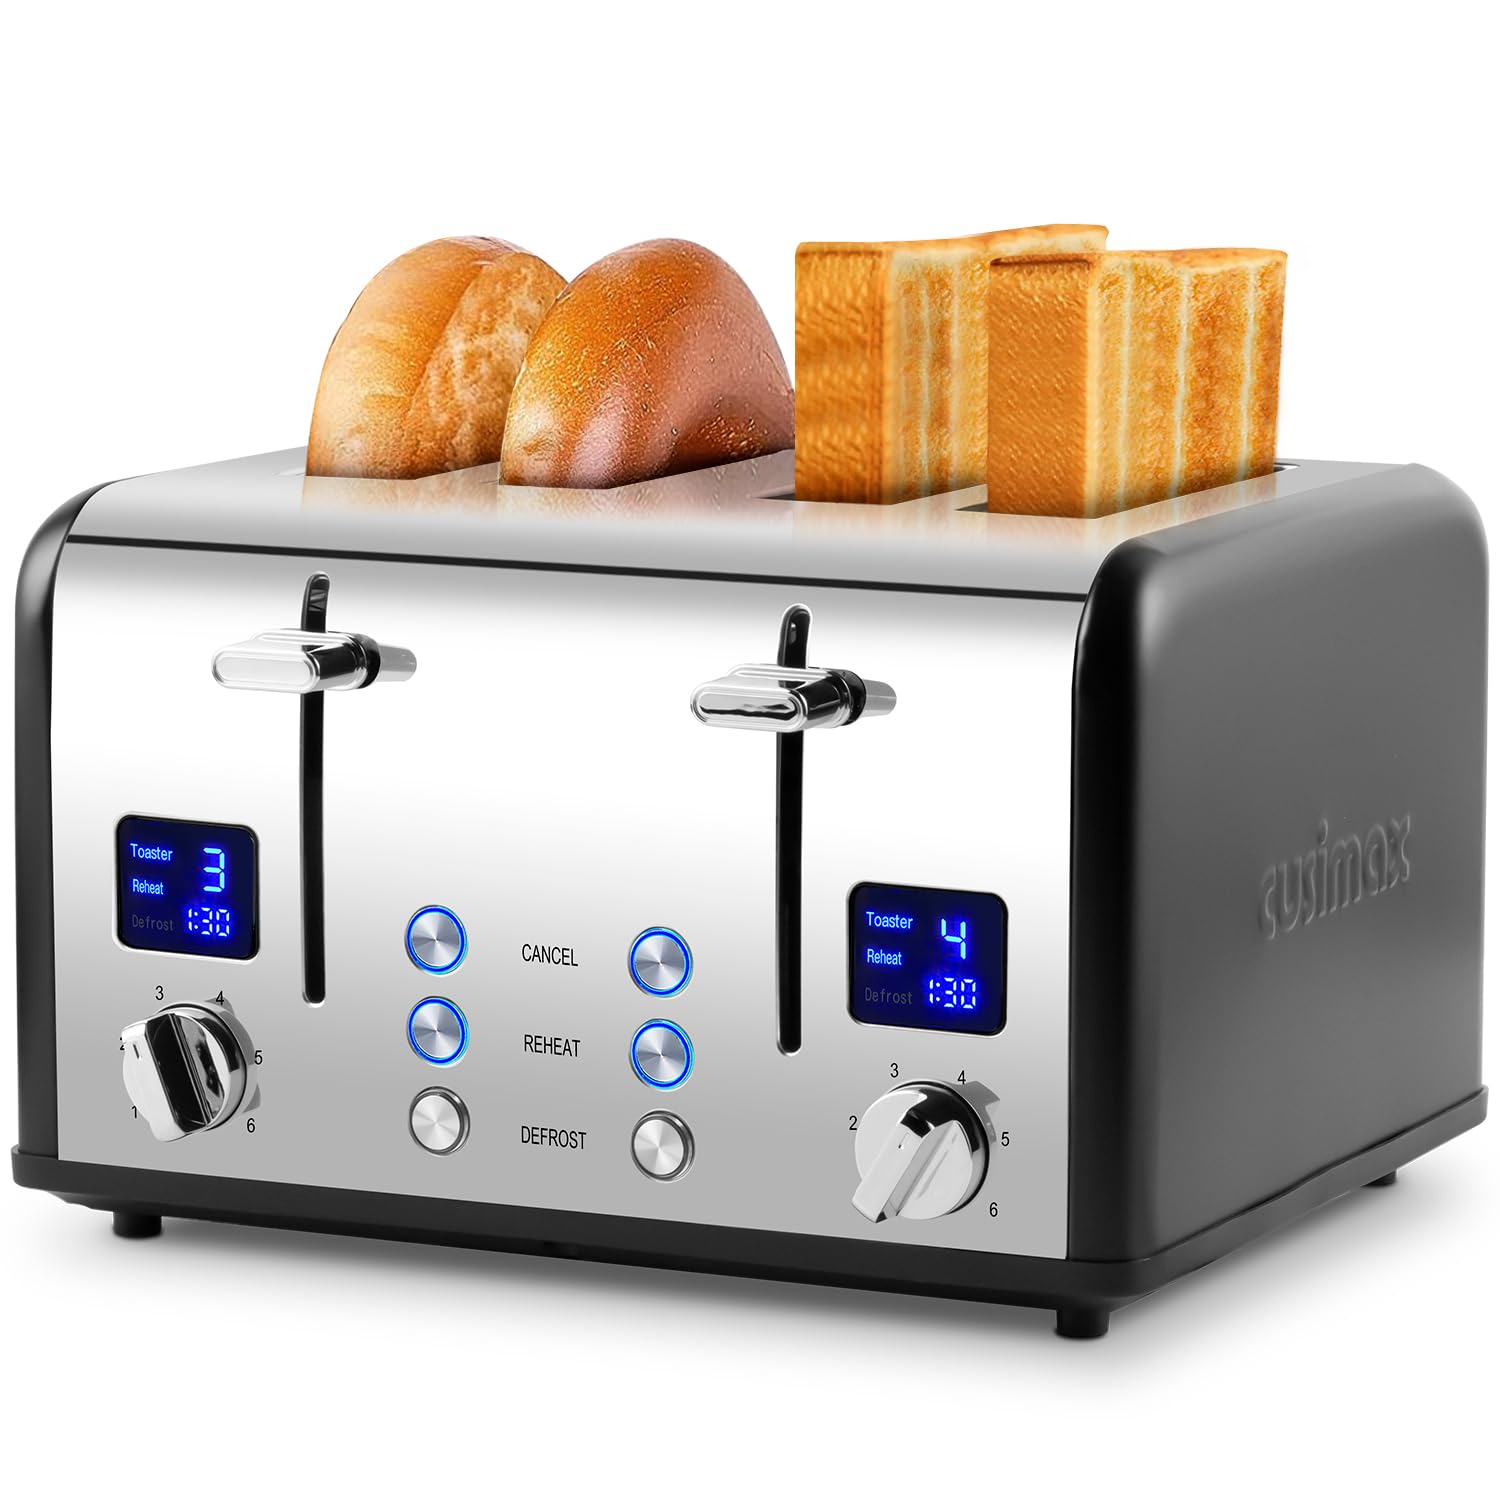 Cusimax 4-Slice Silver Stainless Steel Toaster With Display-Cusimax